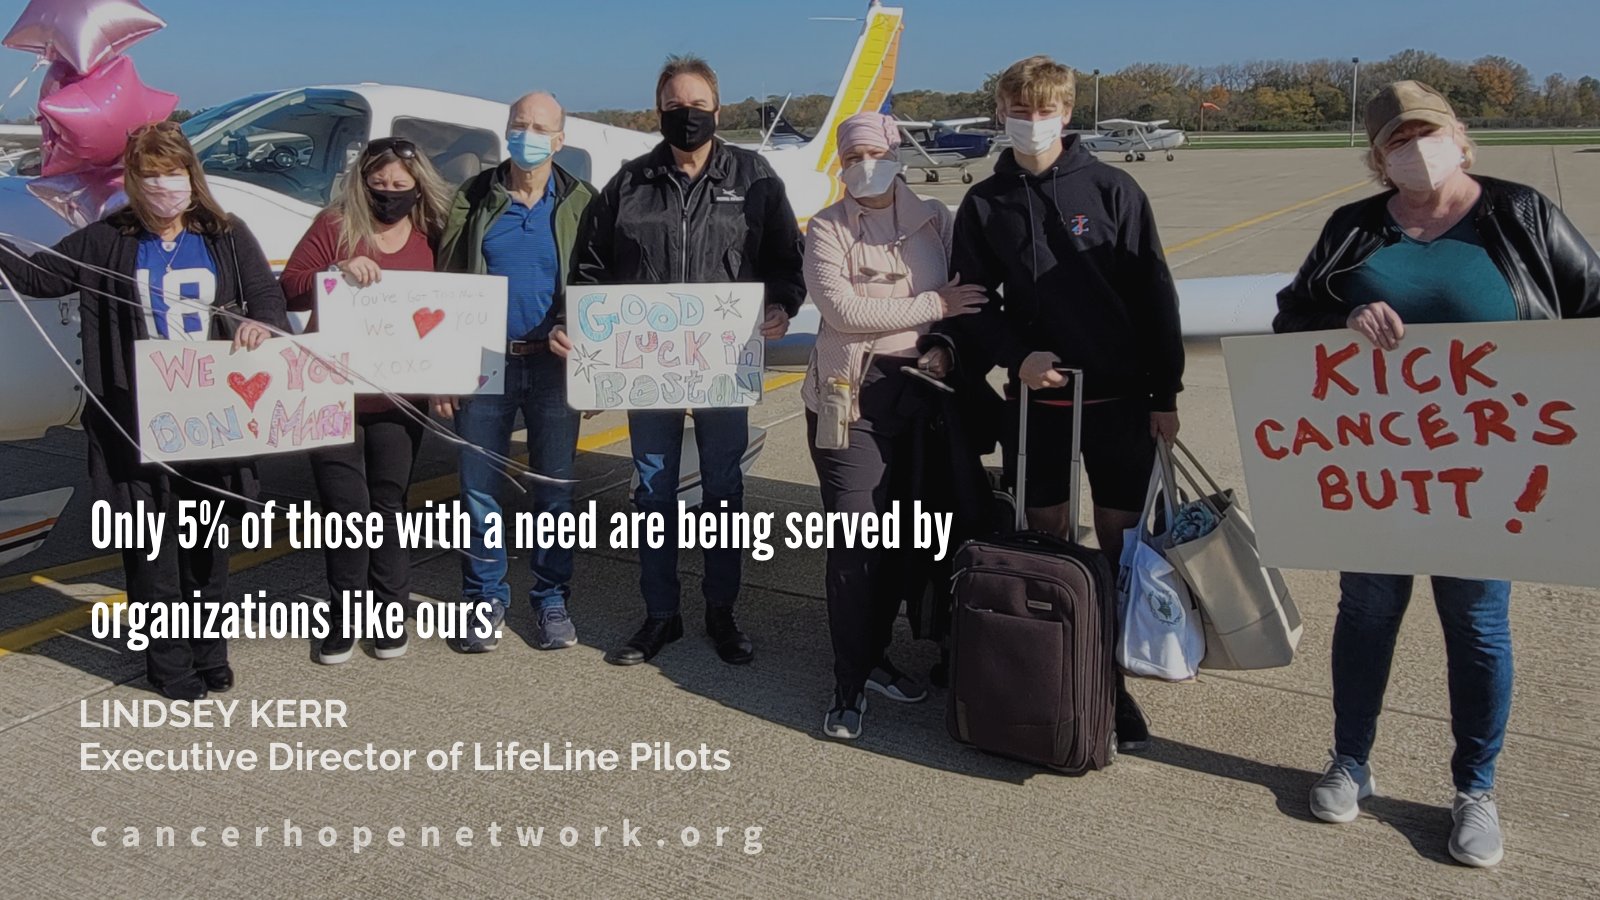 Planes, Trains & Medical Bills: Getting To & From Cancer Treatment